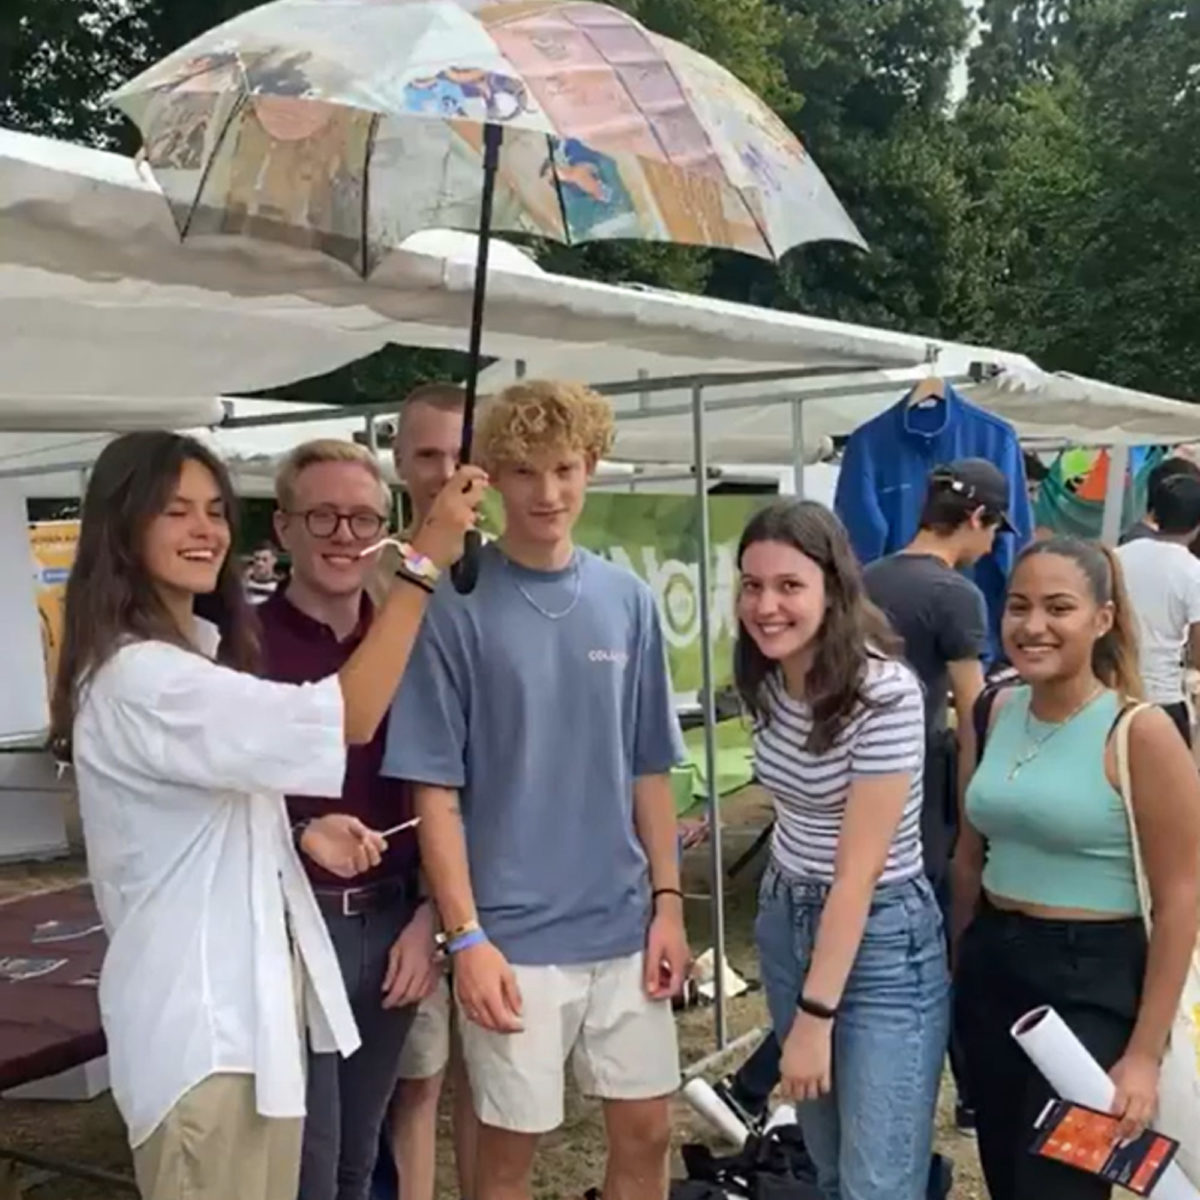 a group picture of students with the library umbrella